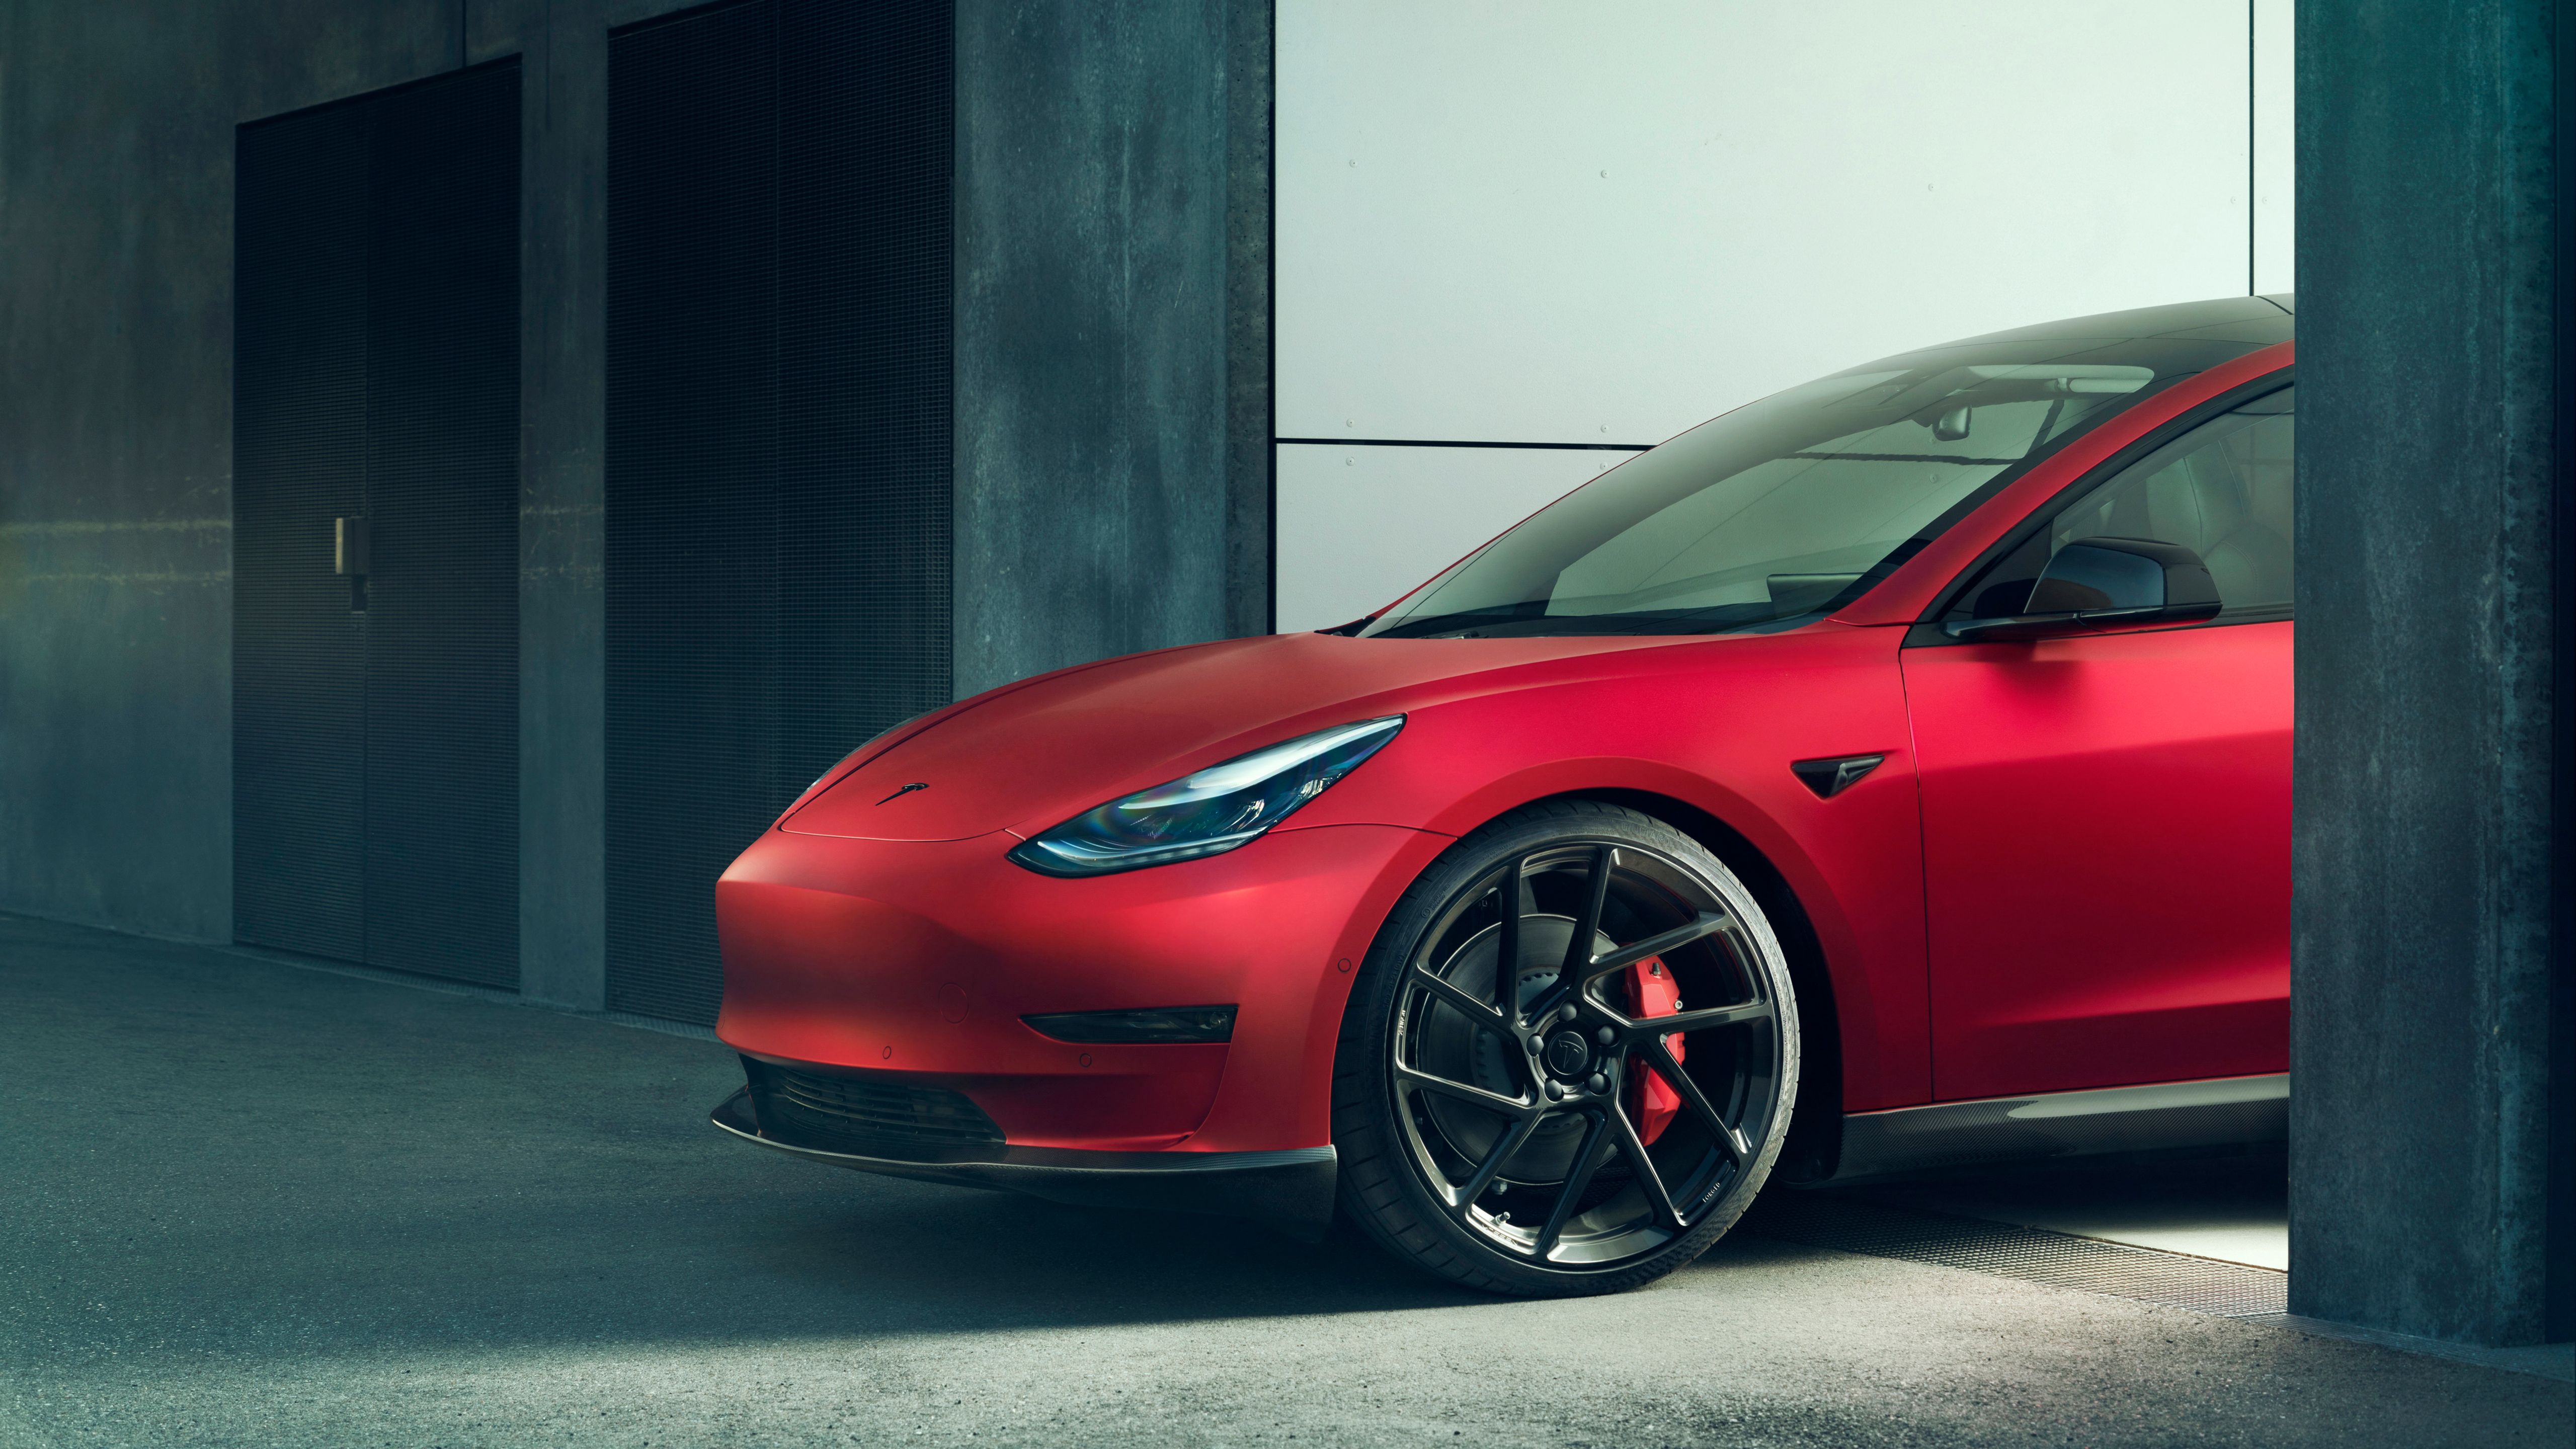 New suspension offers a more aggressive stance for the Tesla Model 3.